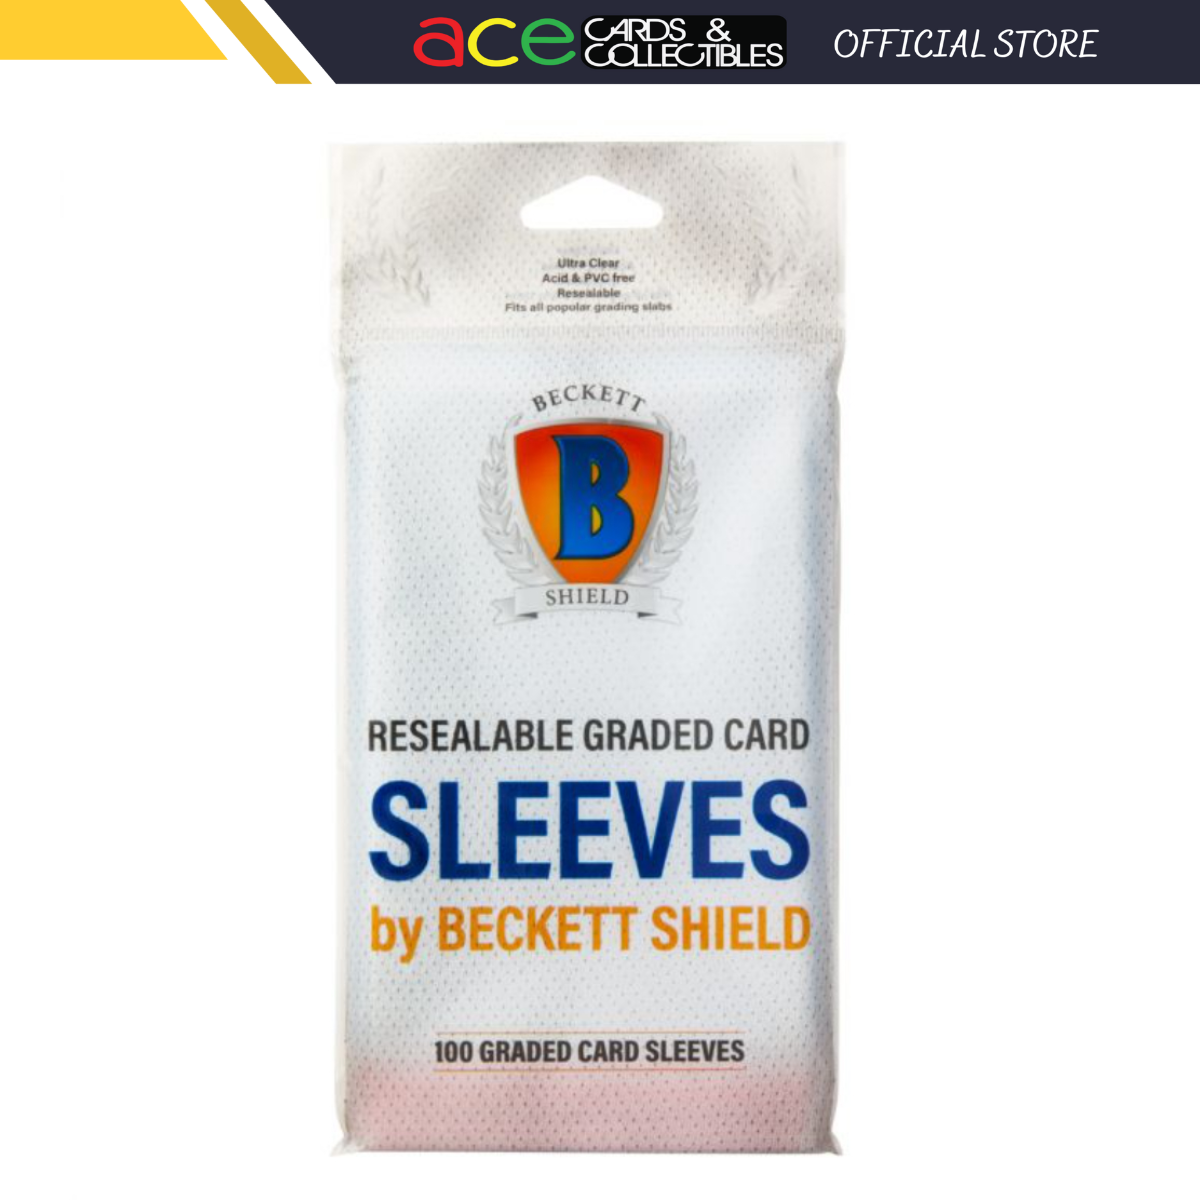 Beckett Shield Resealable Graded Card Sleeves - Clear-Beckett Shield-Ace Cards & Collectibles